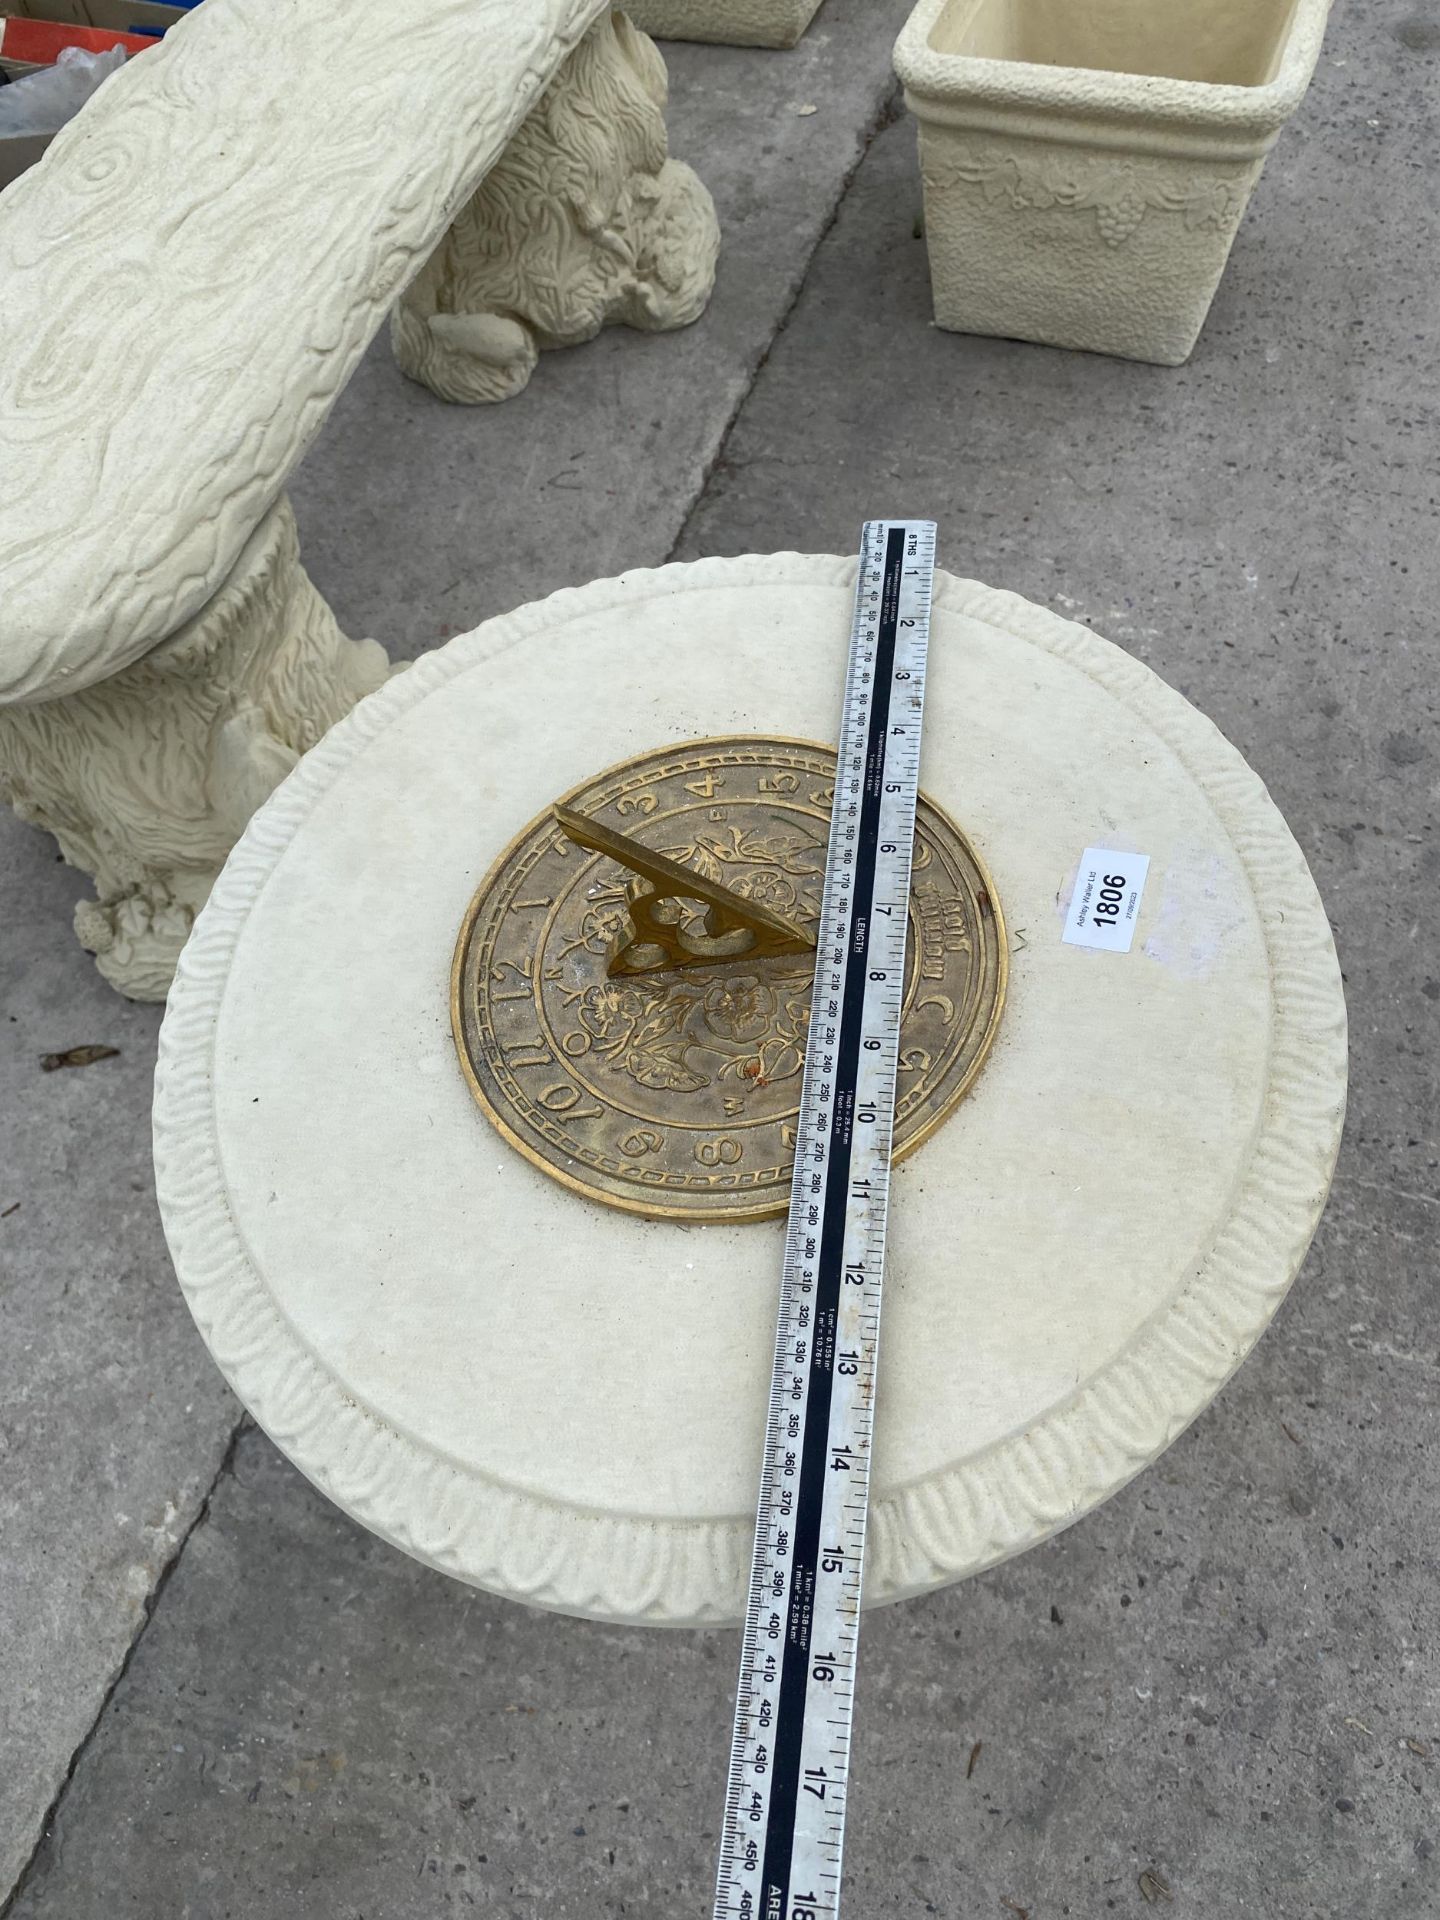 AN AS NEW EX DISPLAY CONCRETE COLUMN SUN DIAL *PLEASE NOTE VAT TO BE PAID ON THIS ITEM* - Image 3 of 3